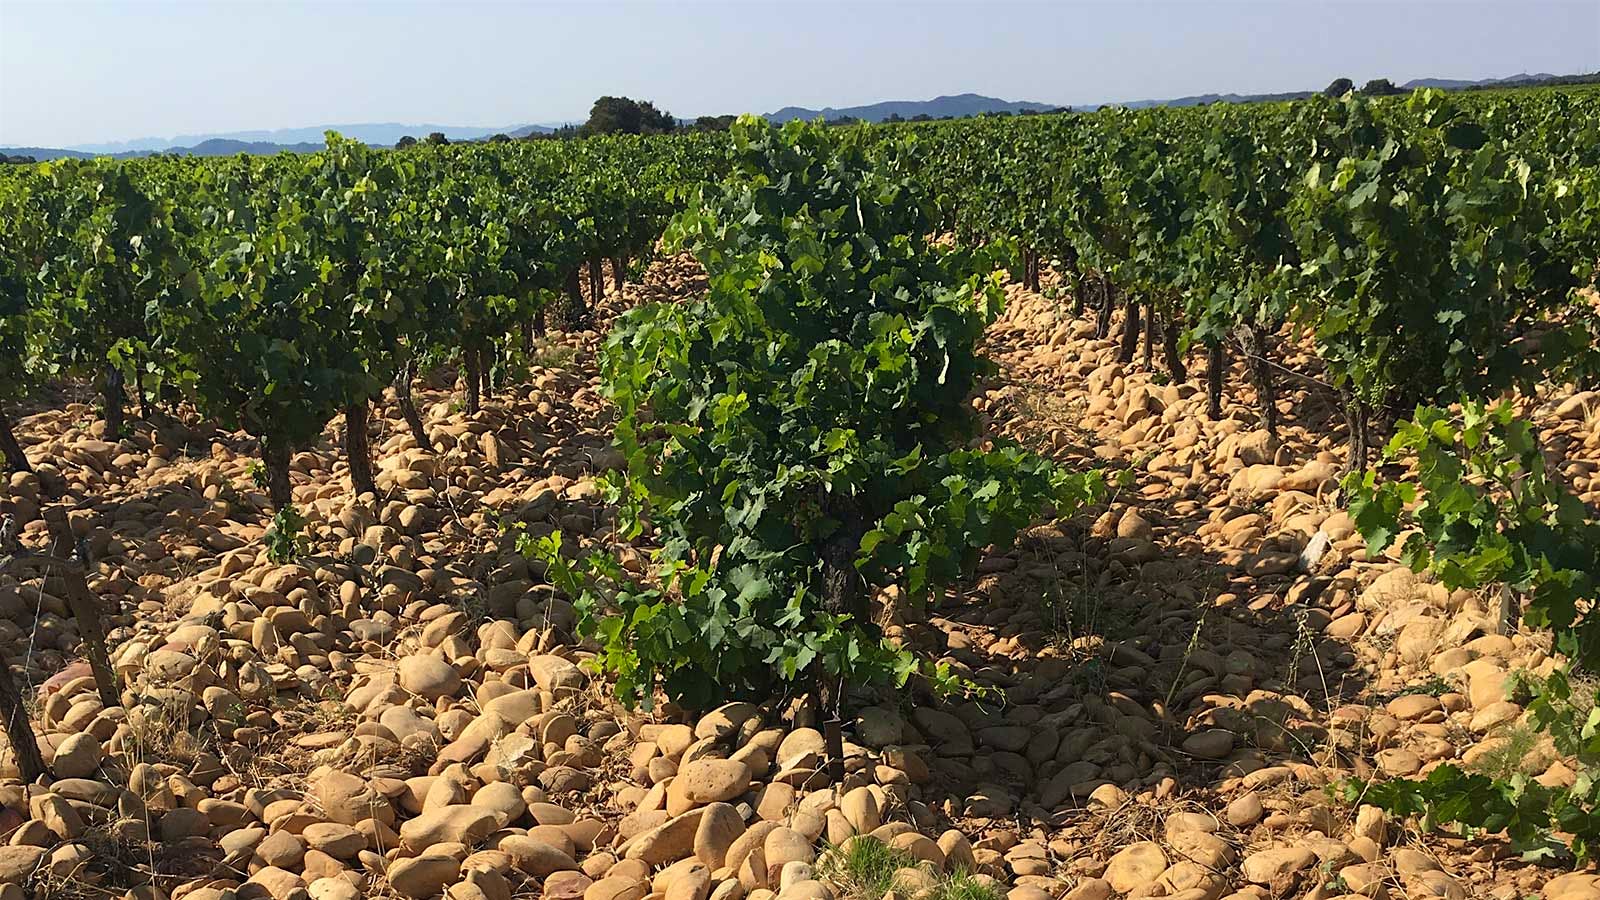 Large, rounded stones cover the rows between vines in a vineyard on the Vallongue plateau.